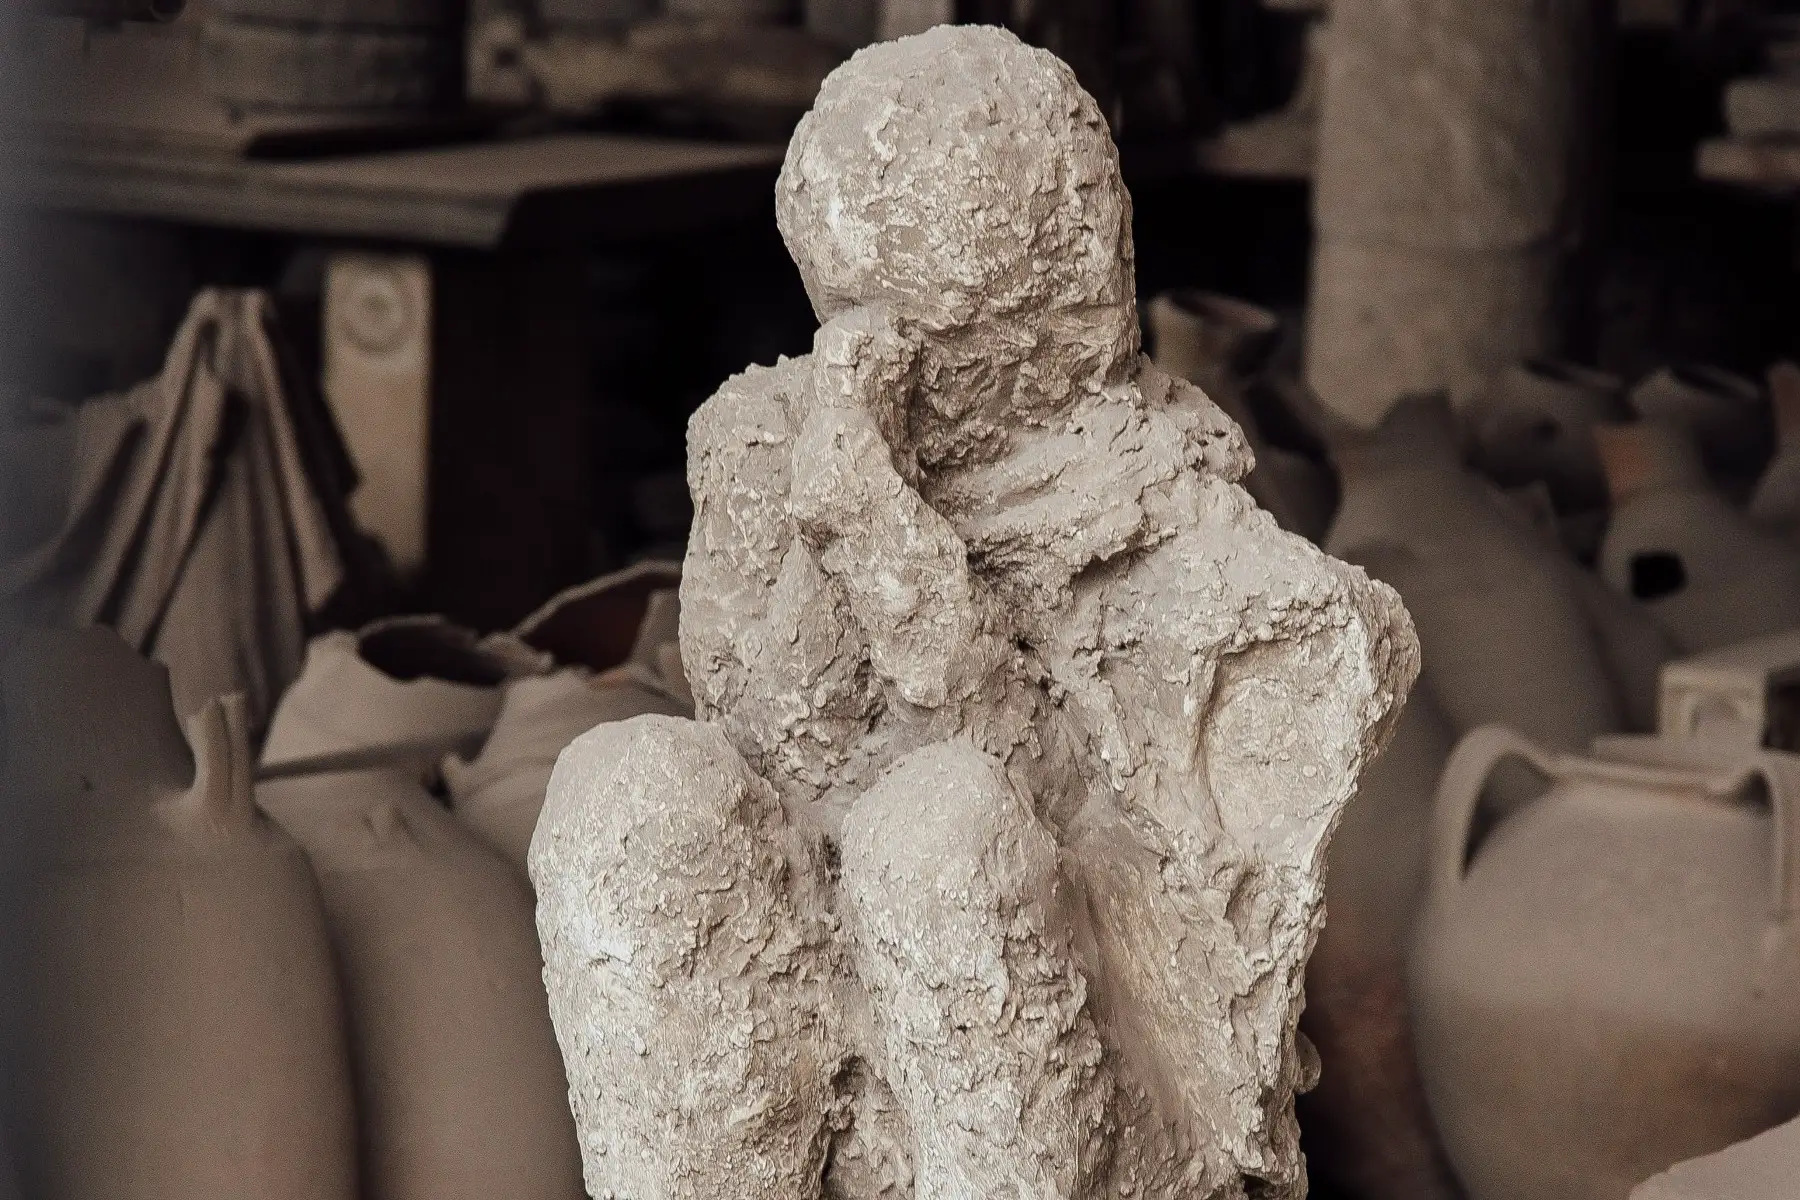 A woman preserved in ash in the ancient Roman city of Pompeii